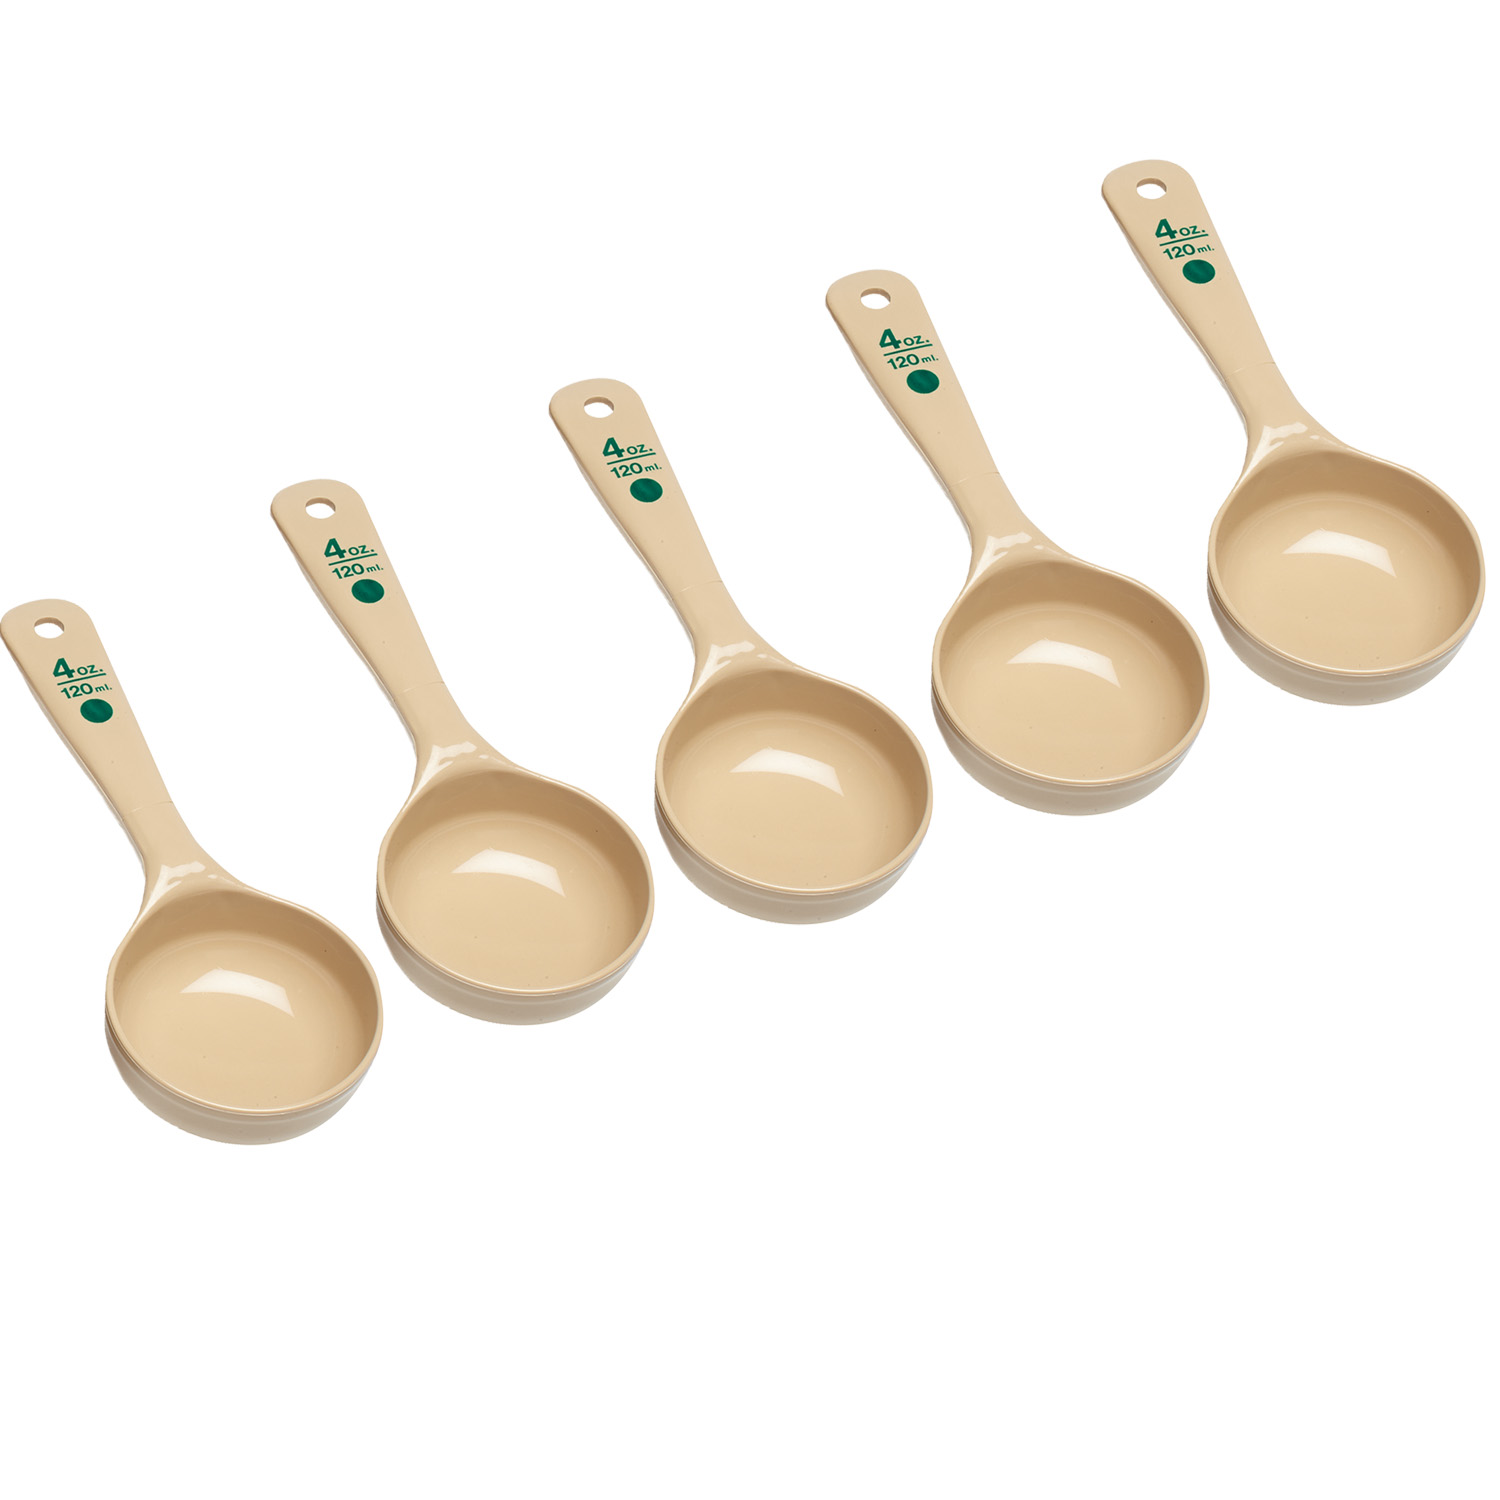 Becker's Exclusive Kits 4 oz. Portion Control Serving Spoon, Set of 5